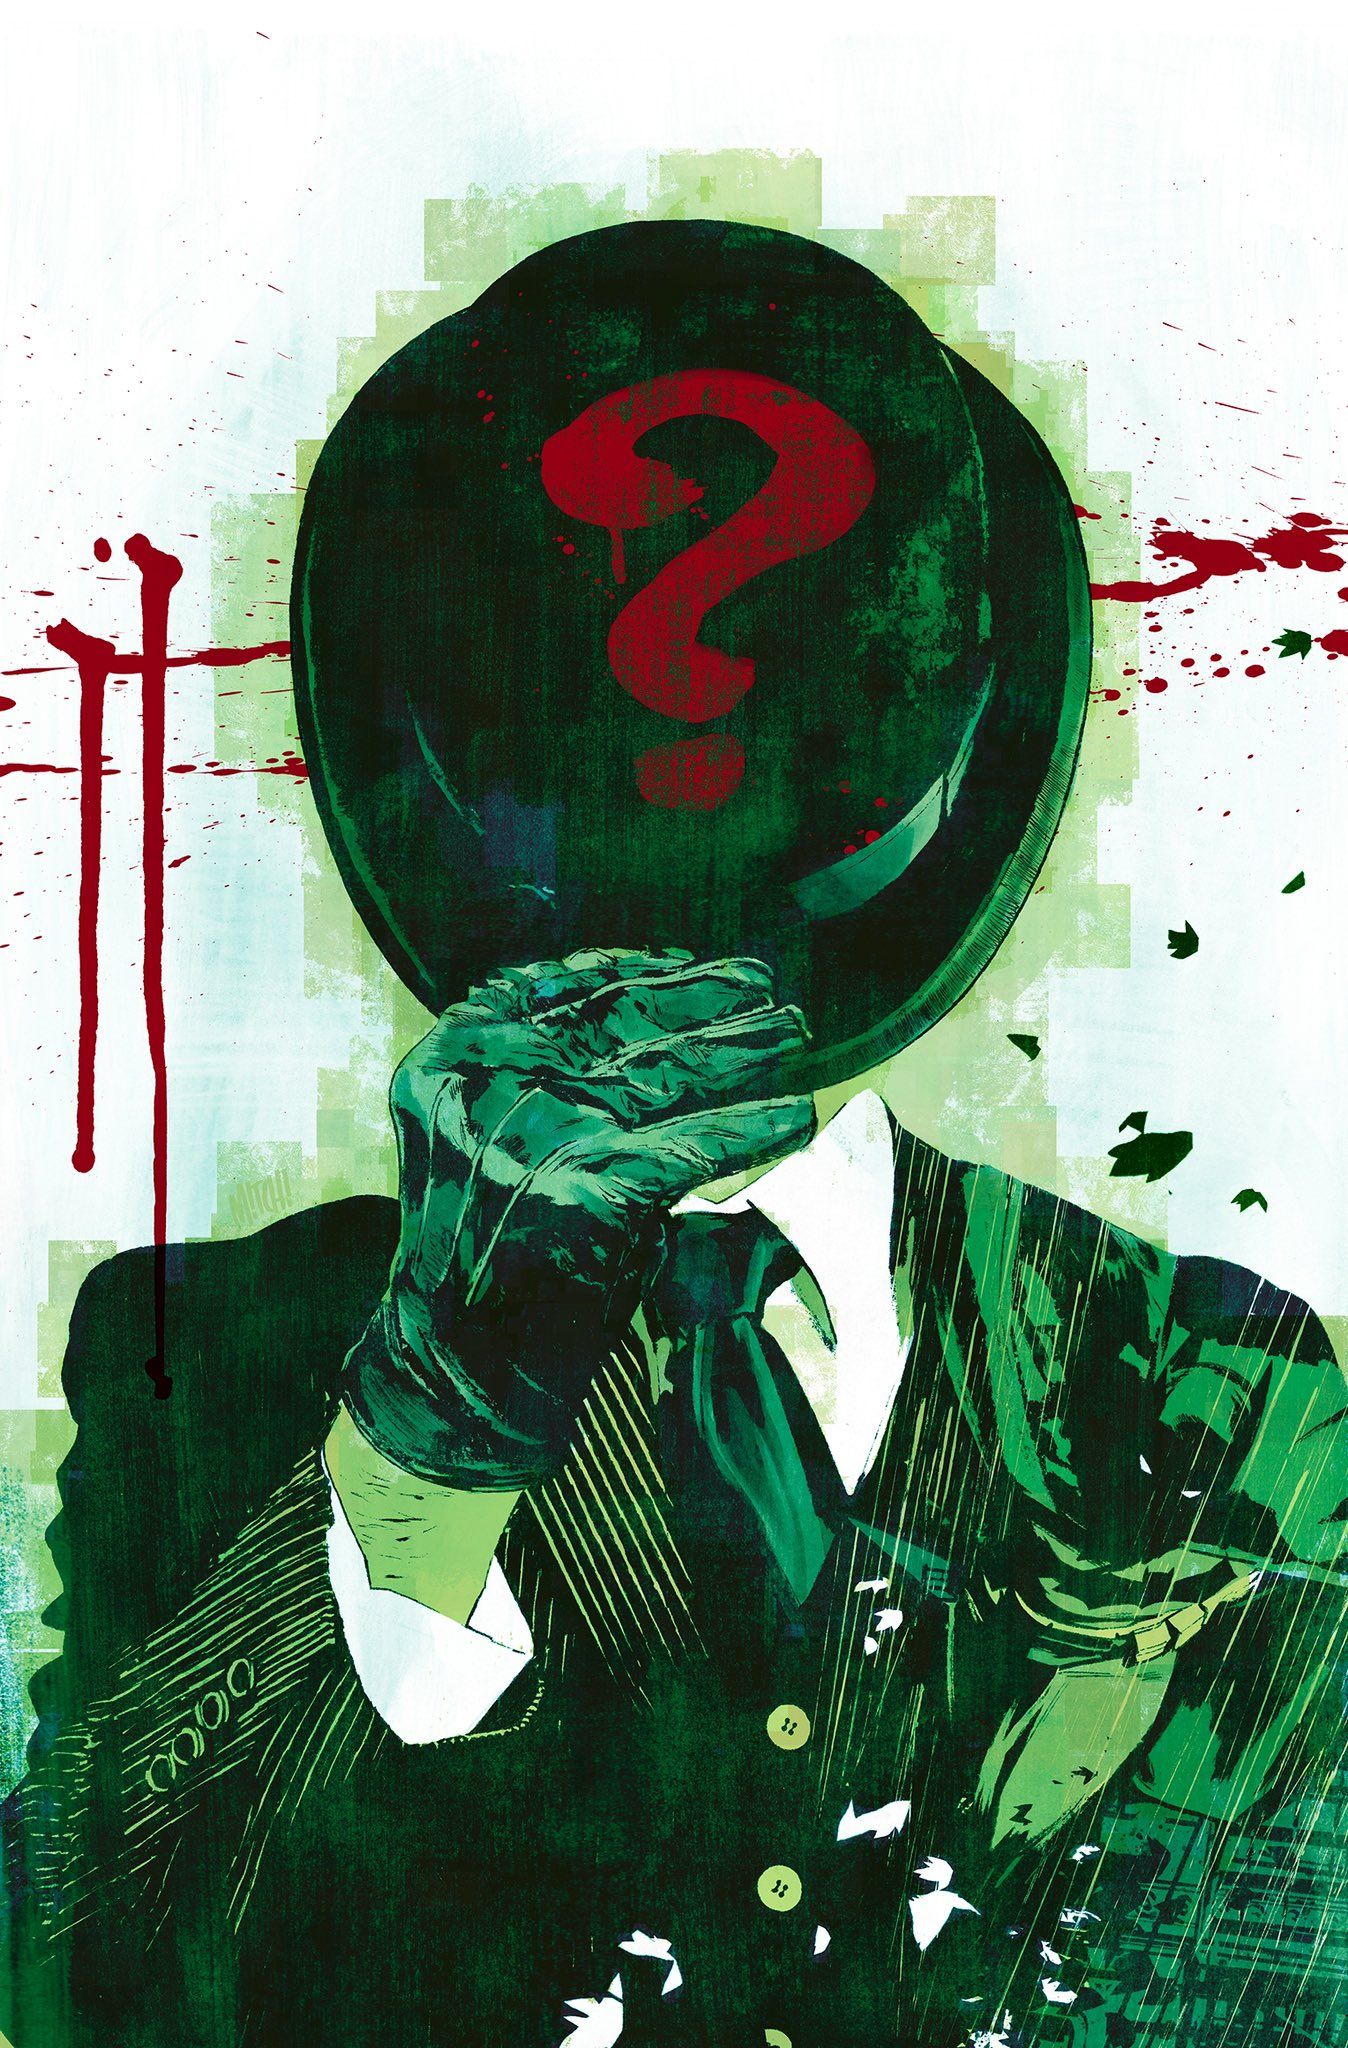 The Riddler Goes on a Murderous Riddle-Free Tear in King and Gerads' Next Batman Tale